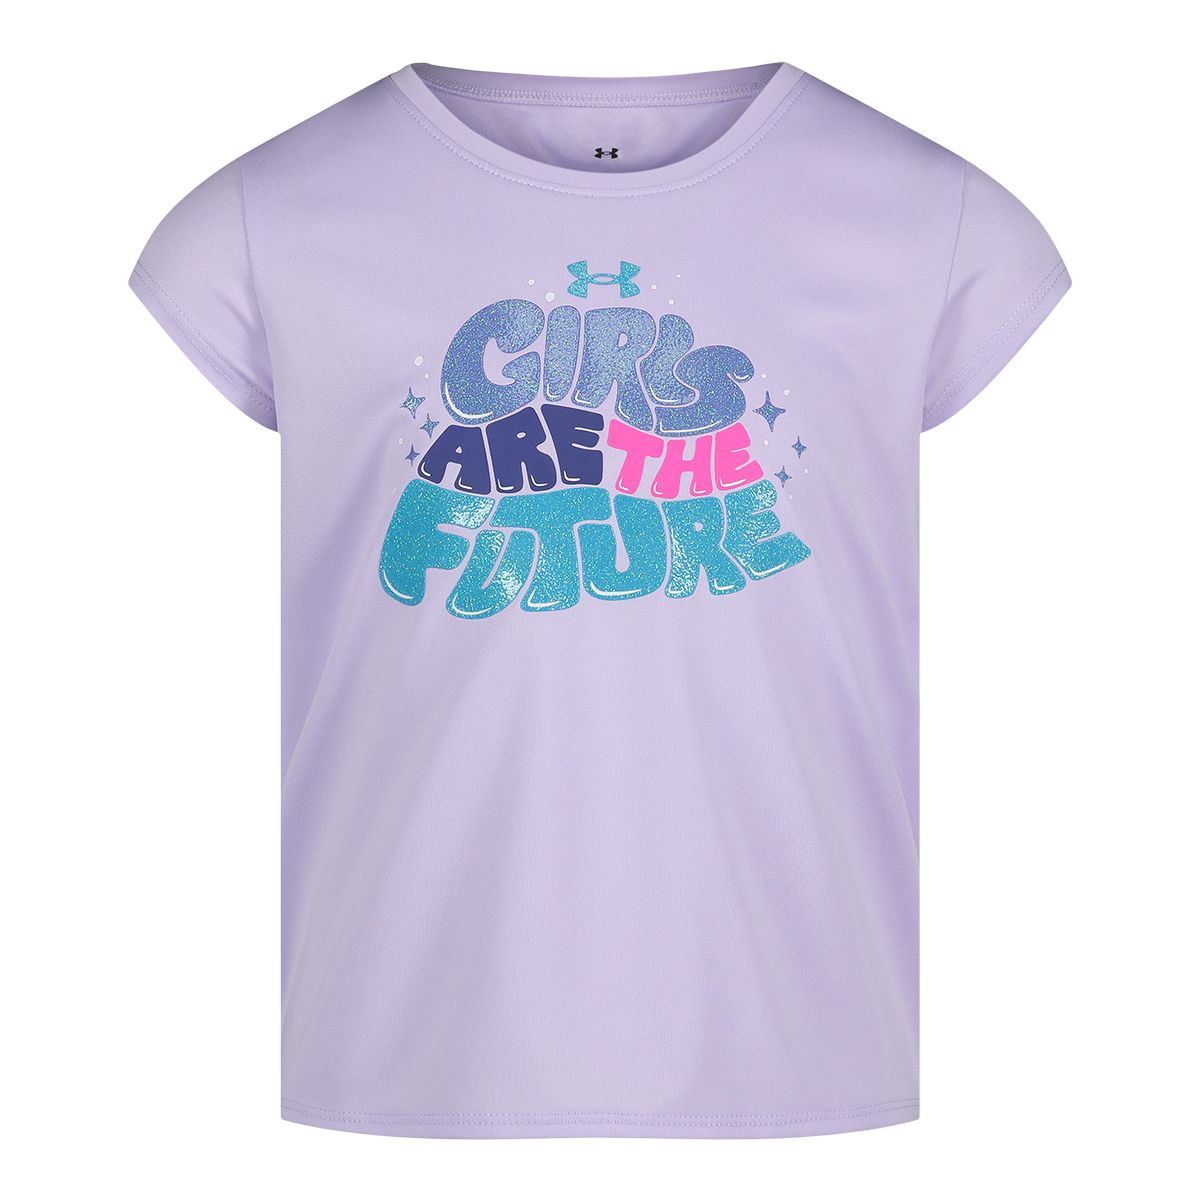 Image of Under Armour Toddler Girls' 4-6X Girls Are The Future T Shirt